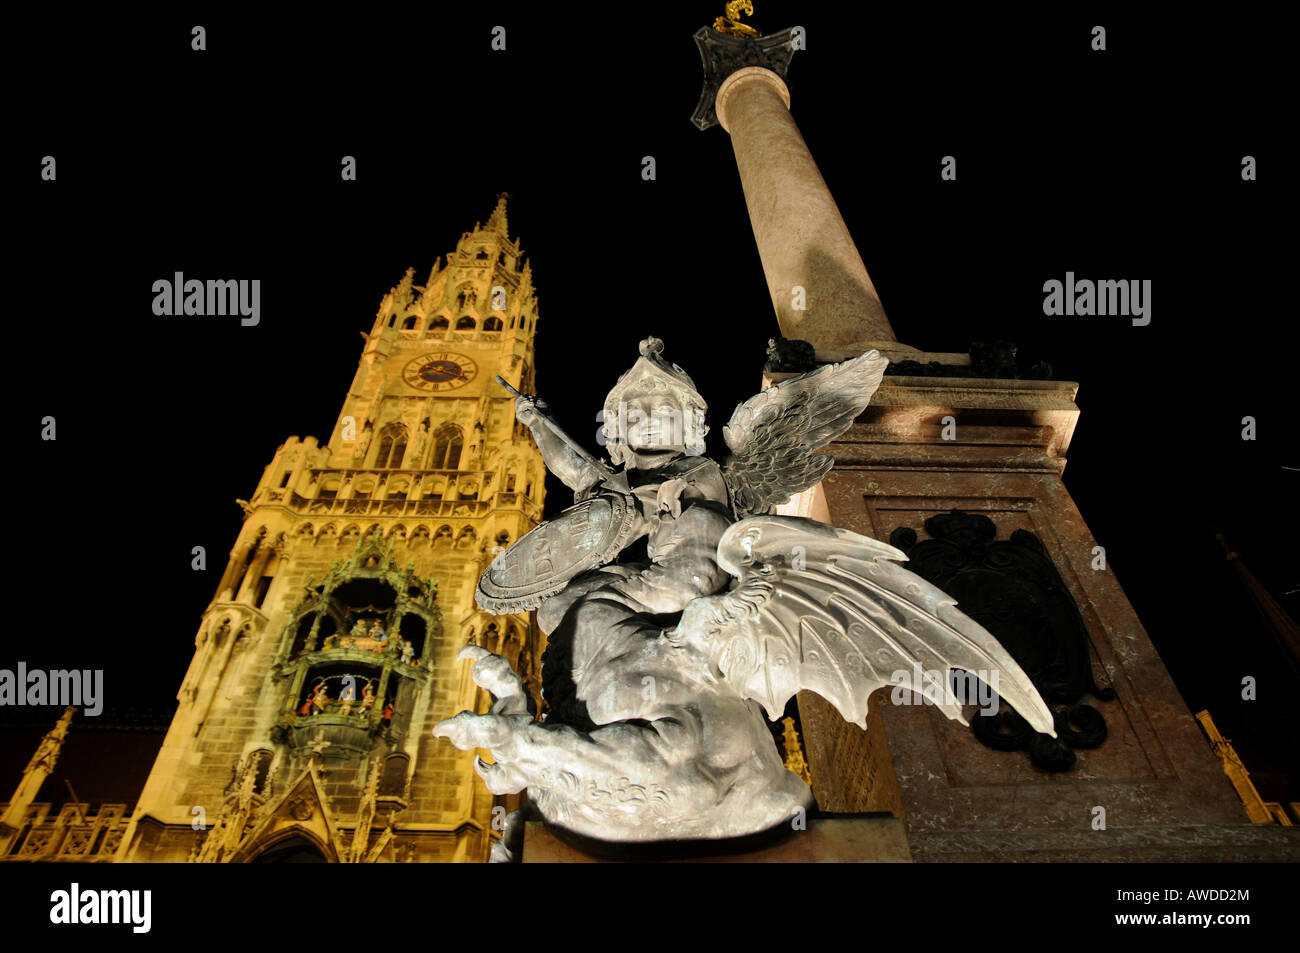 Nighttime shot, angel statue in front of the Mariensaeule (Marian Column) with the town hall in the background, Marienplatz (Ma Stock Photo